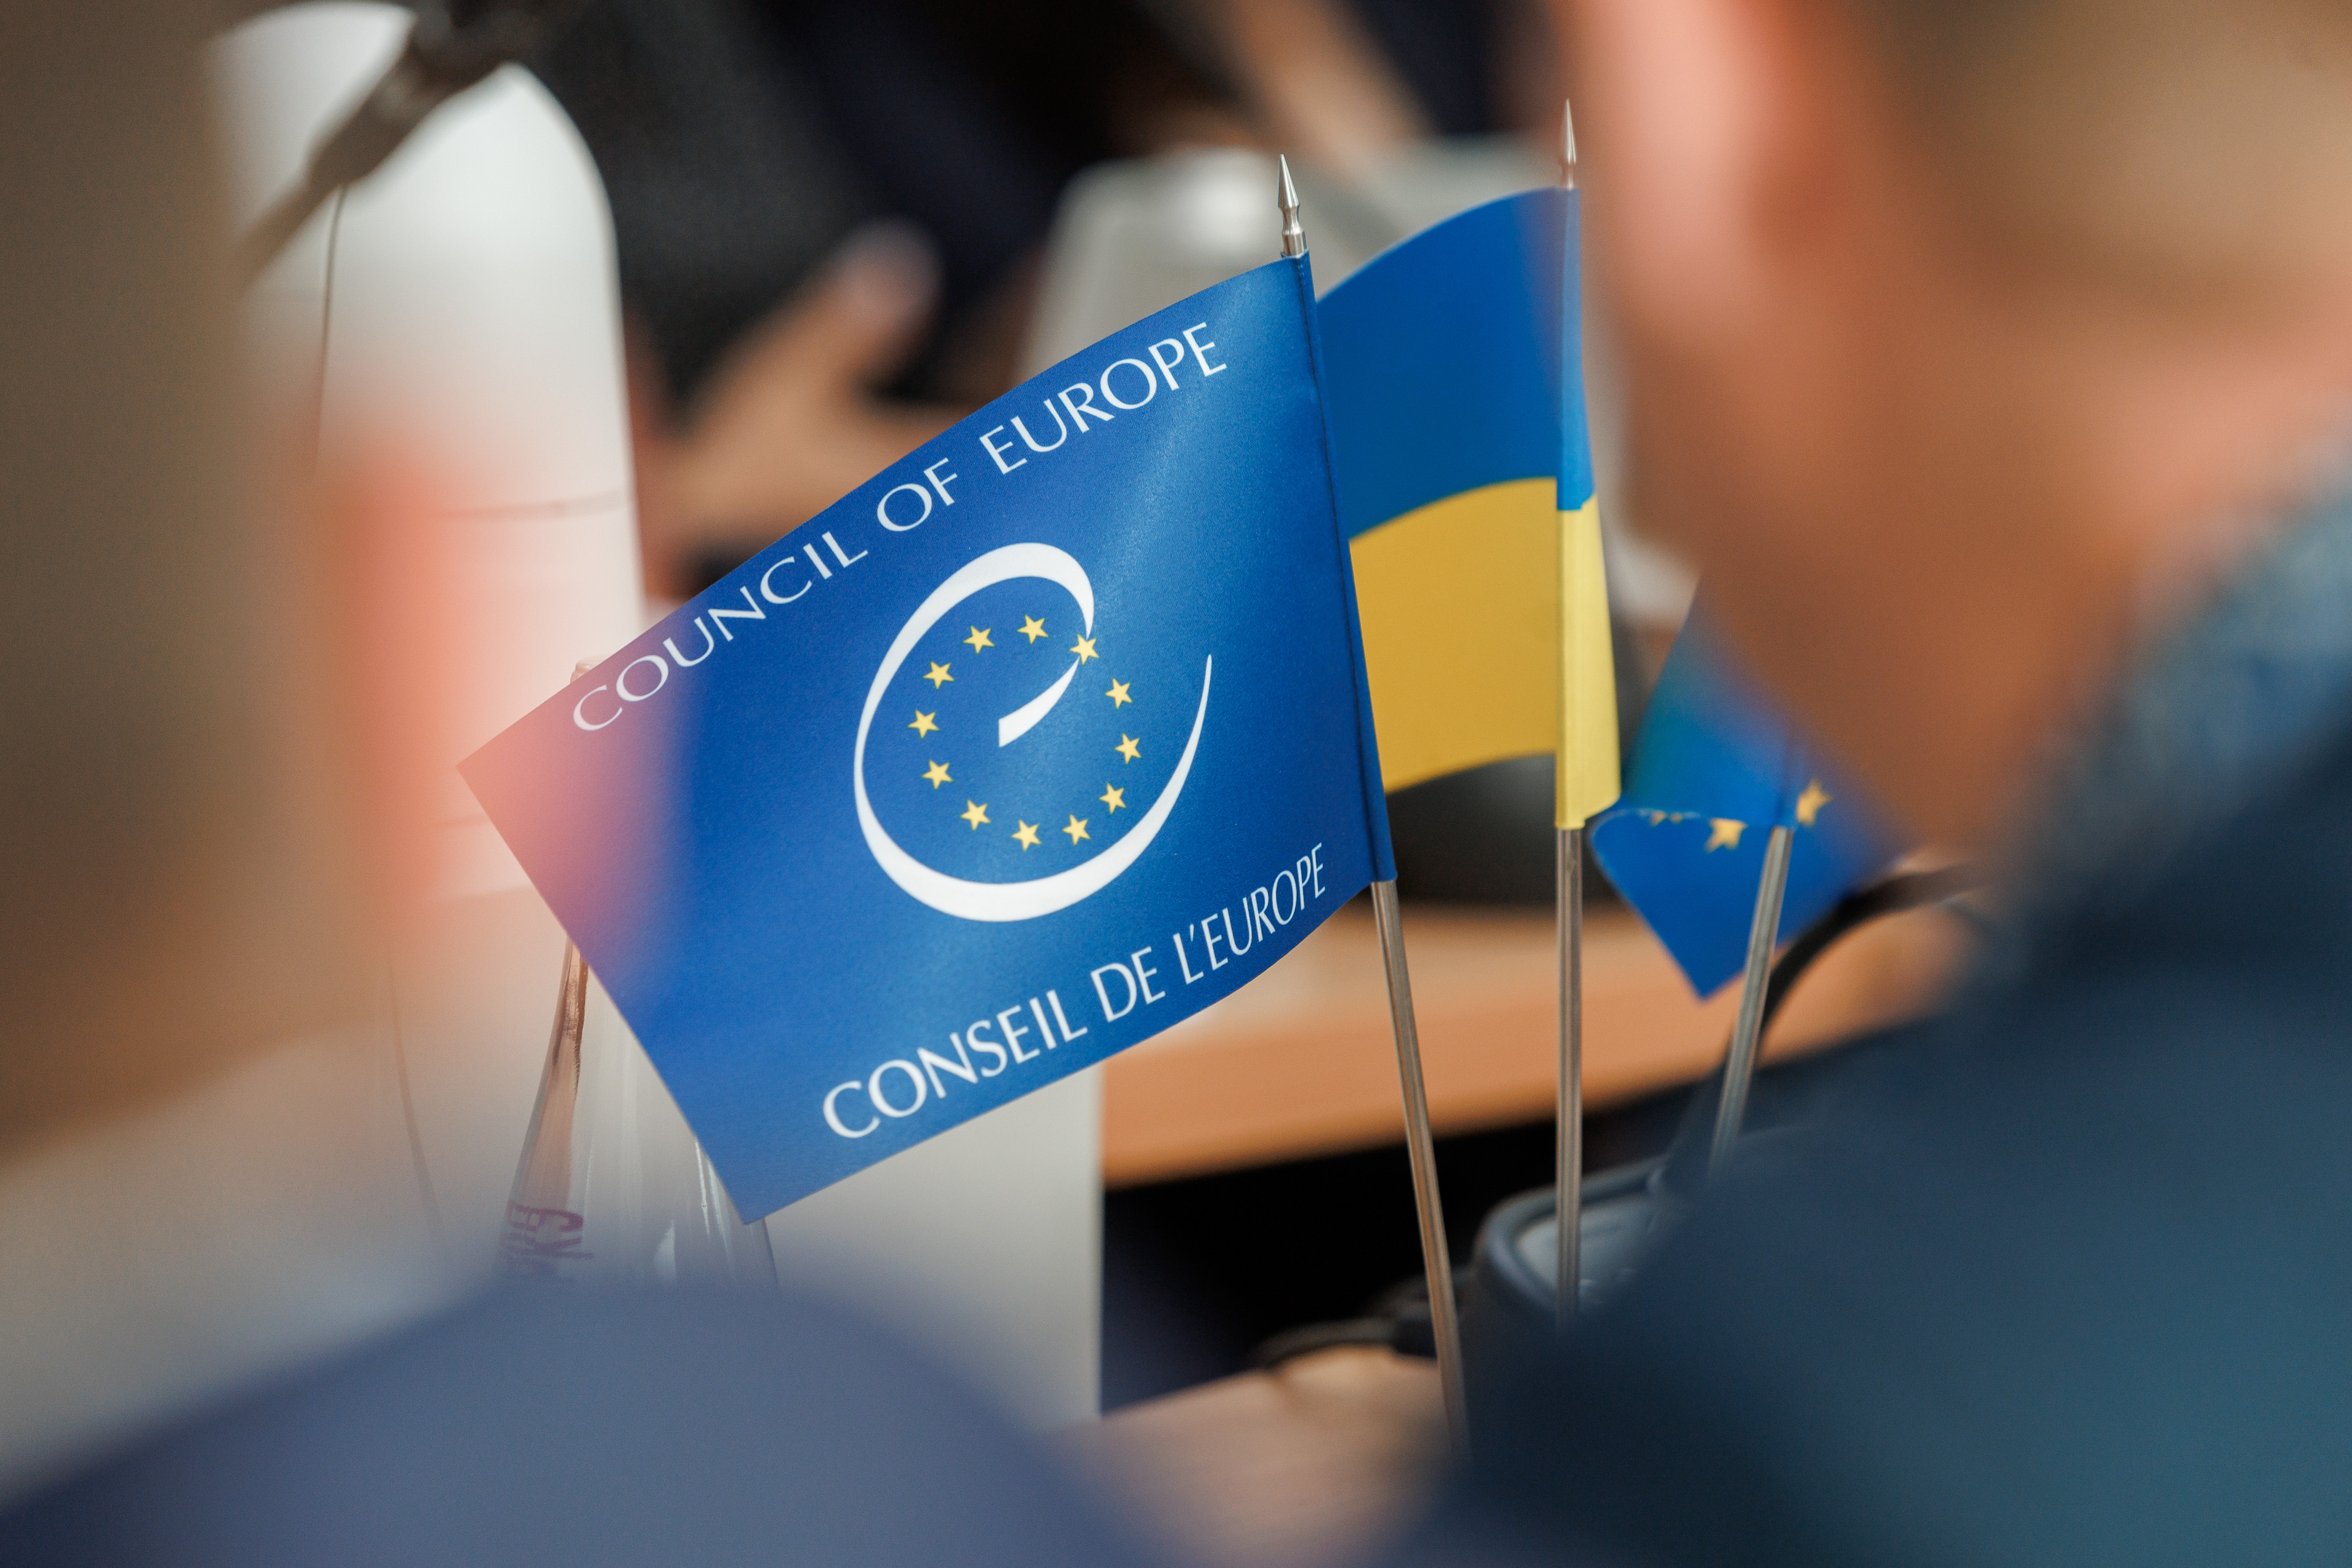 Bar Council of Ukraine officially accredits all CoE HELP online courses available in Ukrainian for lawyers working within the free legal aid system